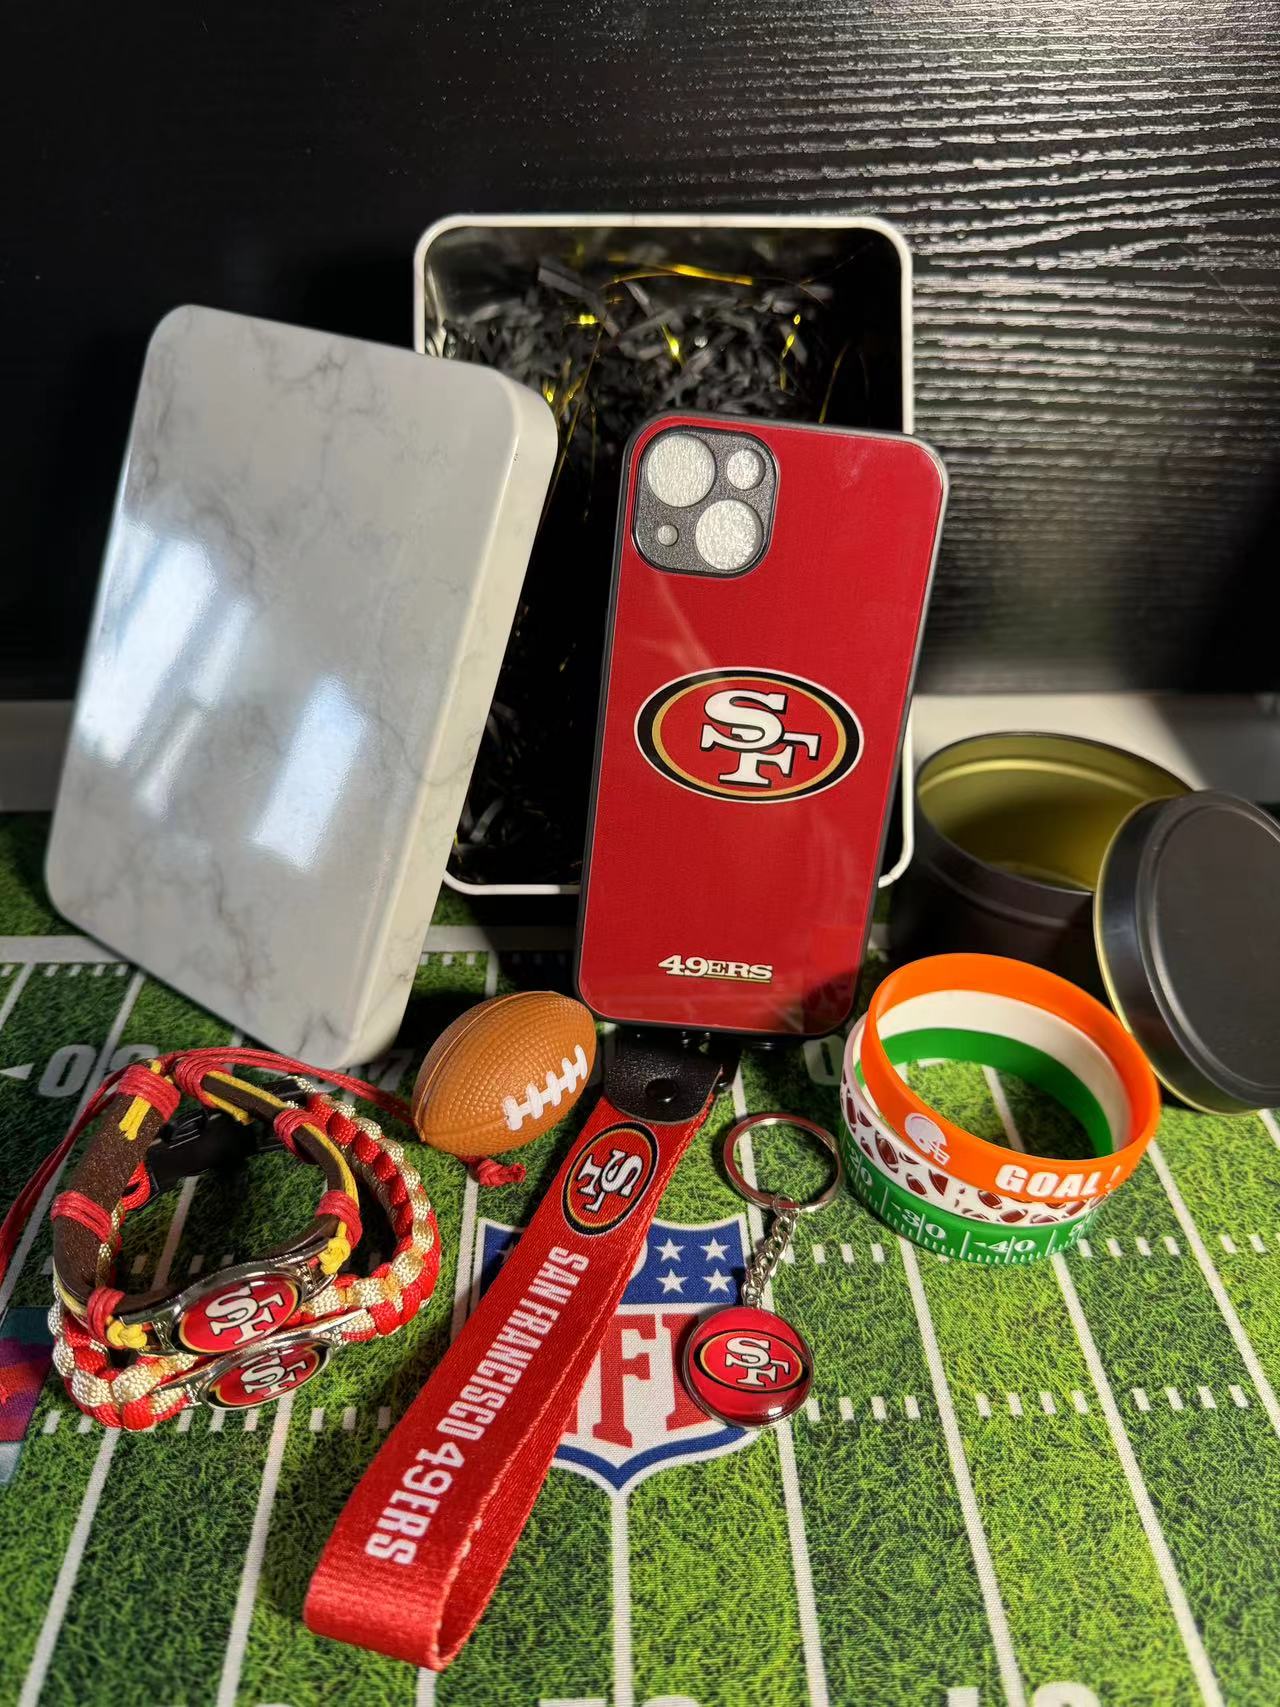 49ers gift box（10% off your order！！！）